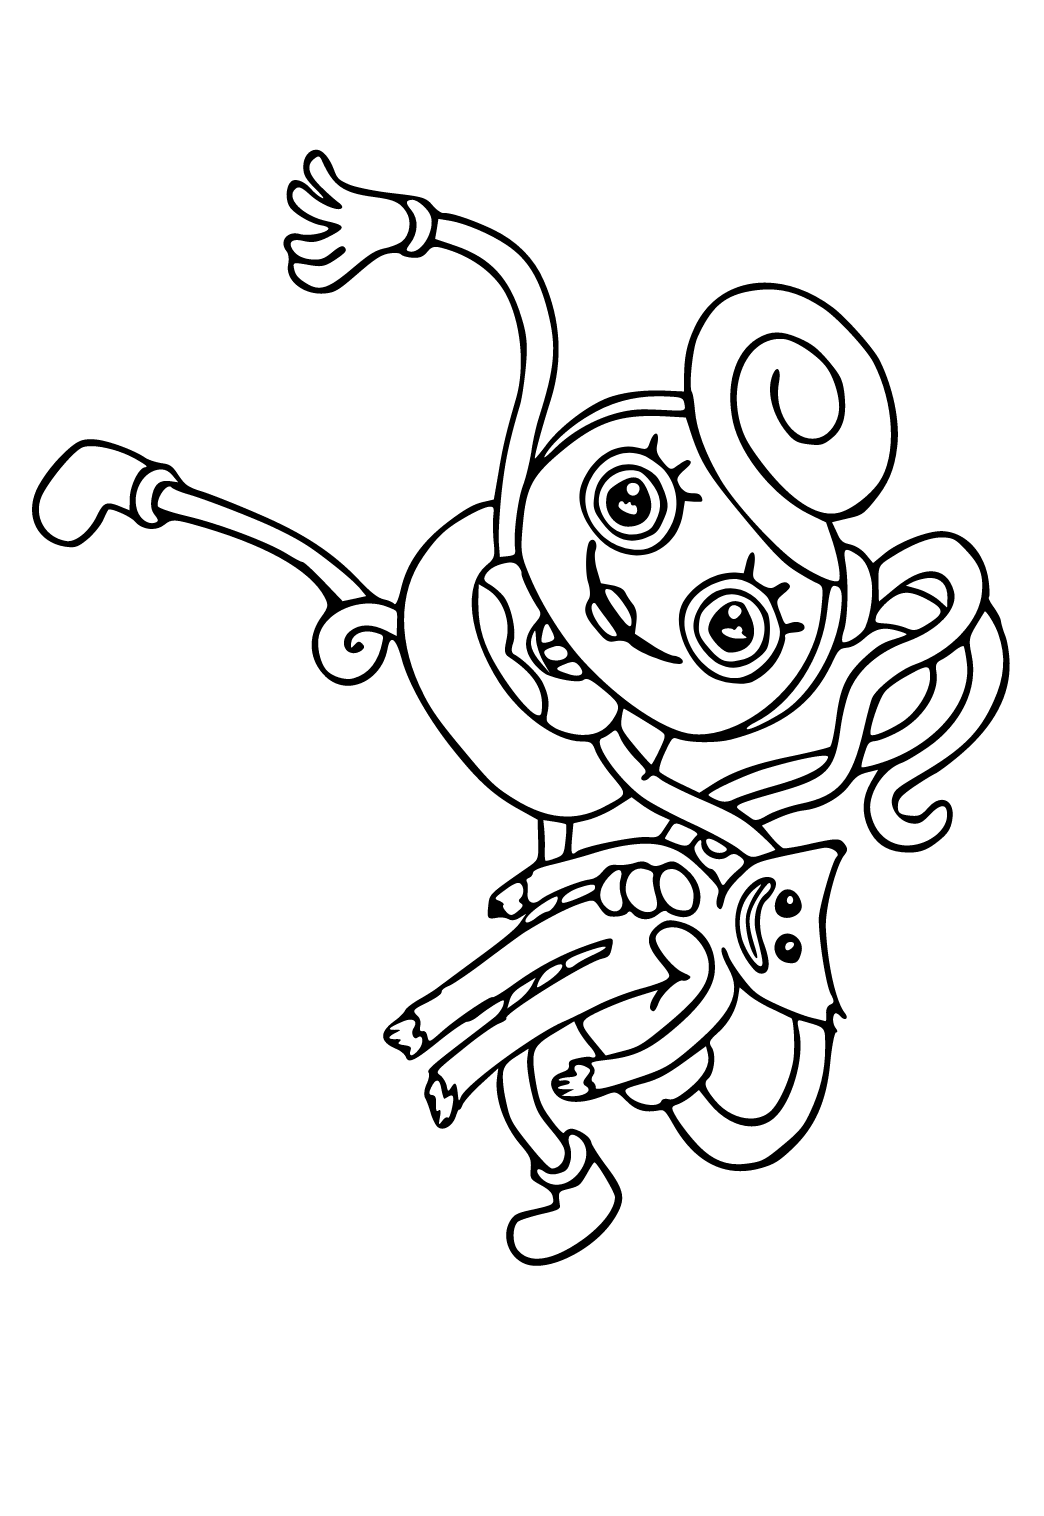 Free Printable Mommy Long Legs Coloring Pages, Sheets and Pictures